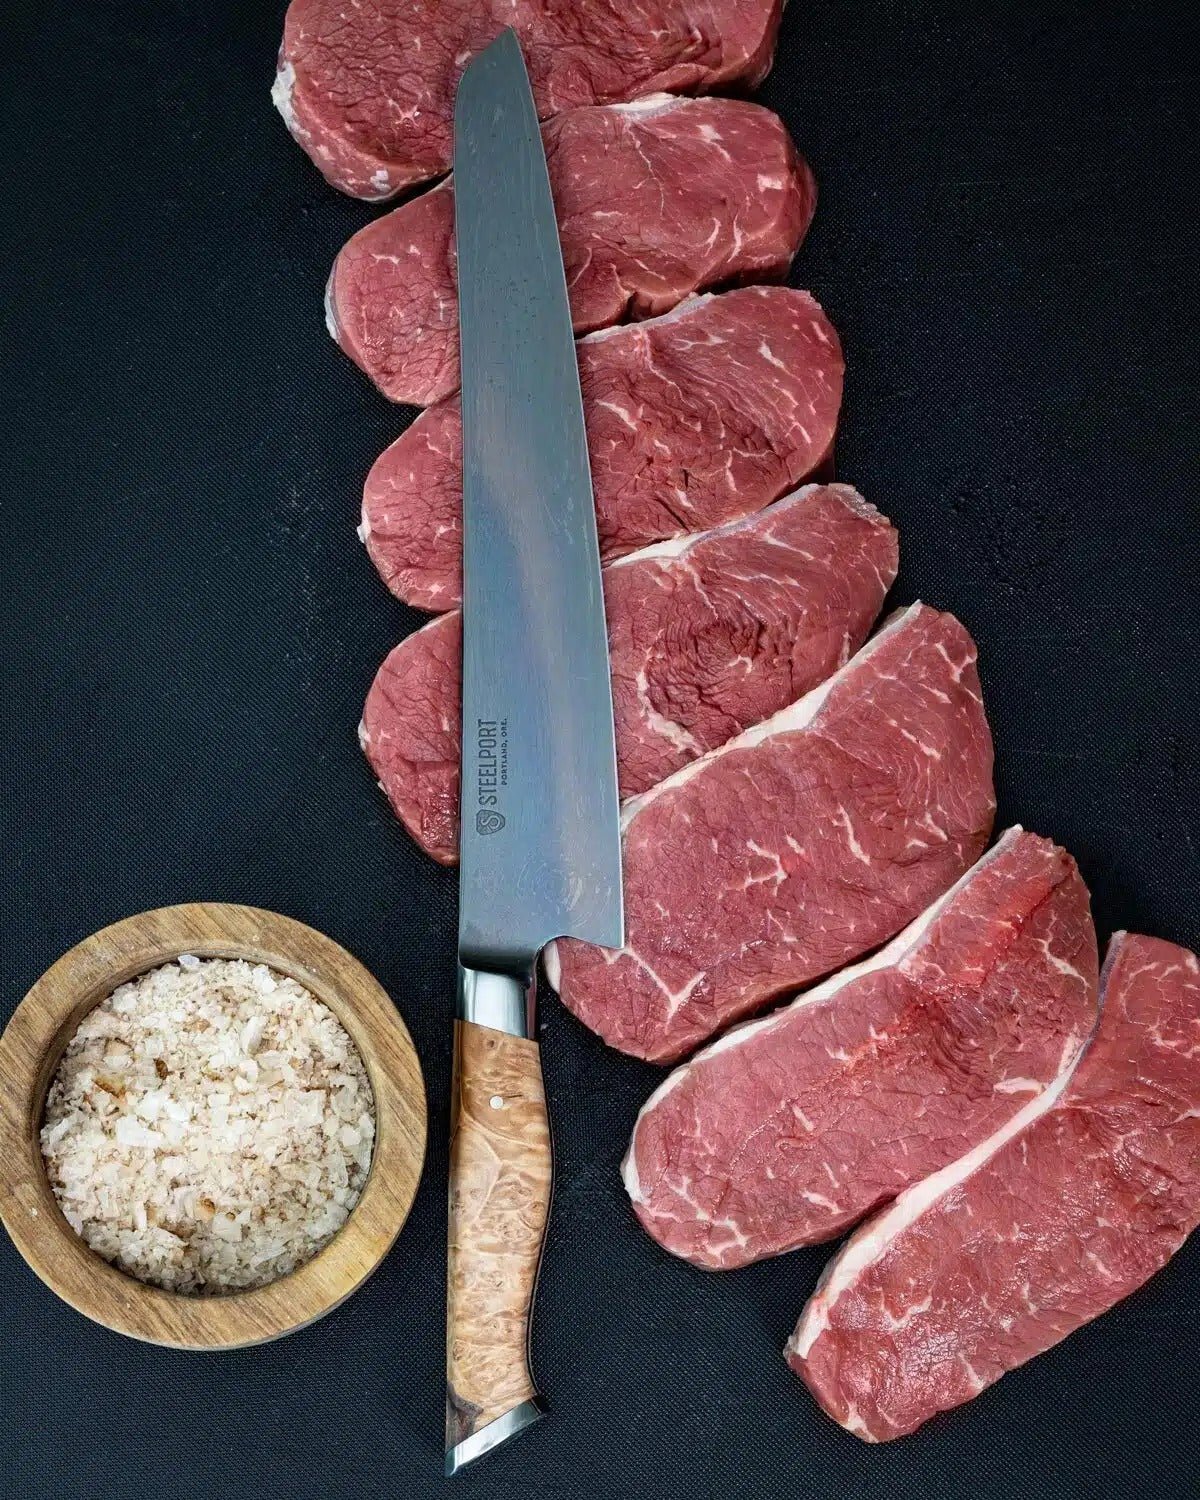 Professional Jerky Meat Slicing Knife - Stainless Like The Pros Use! 10